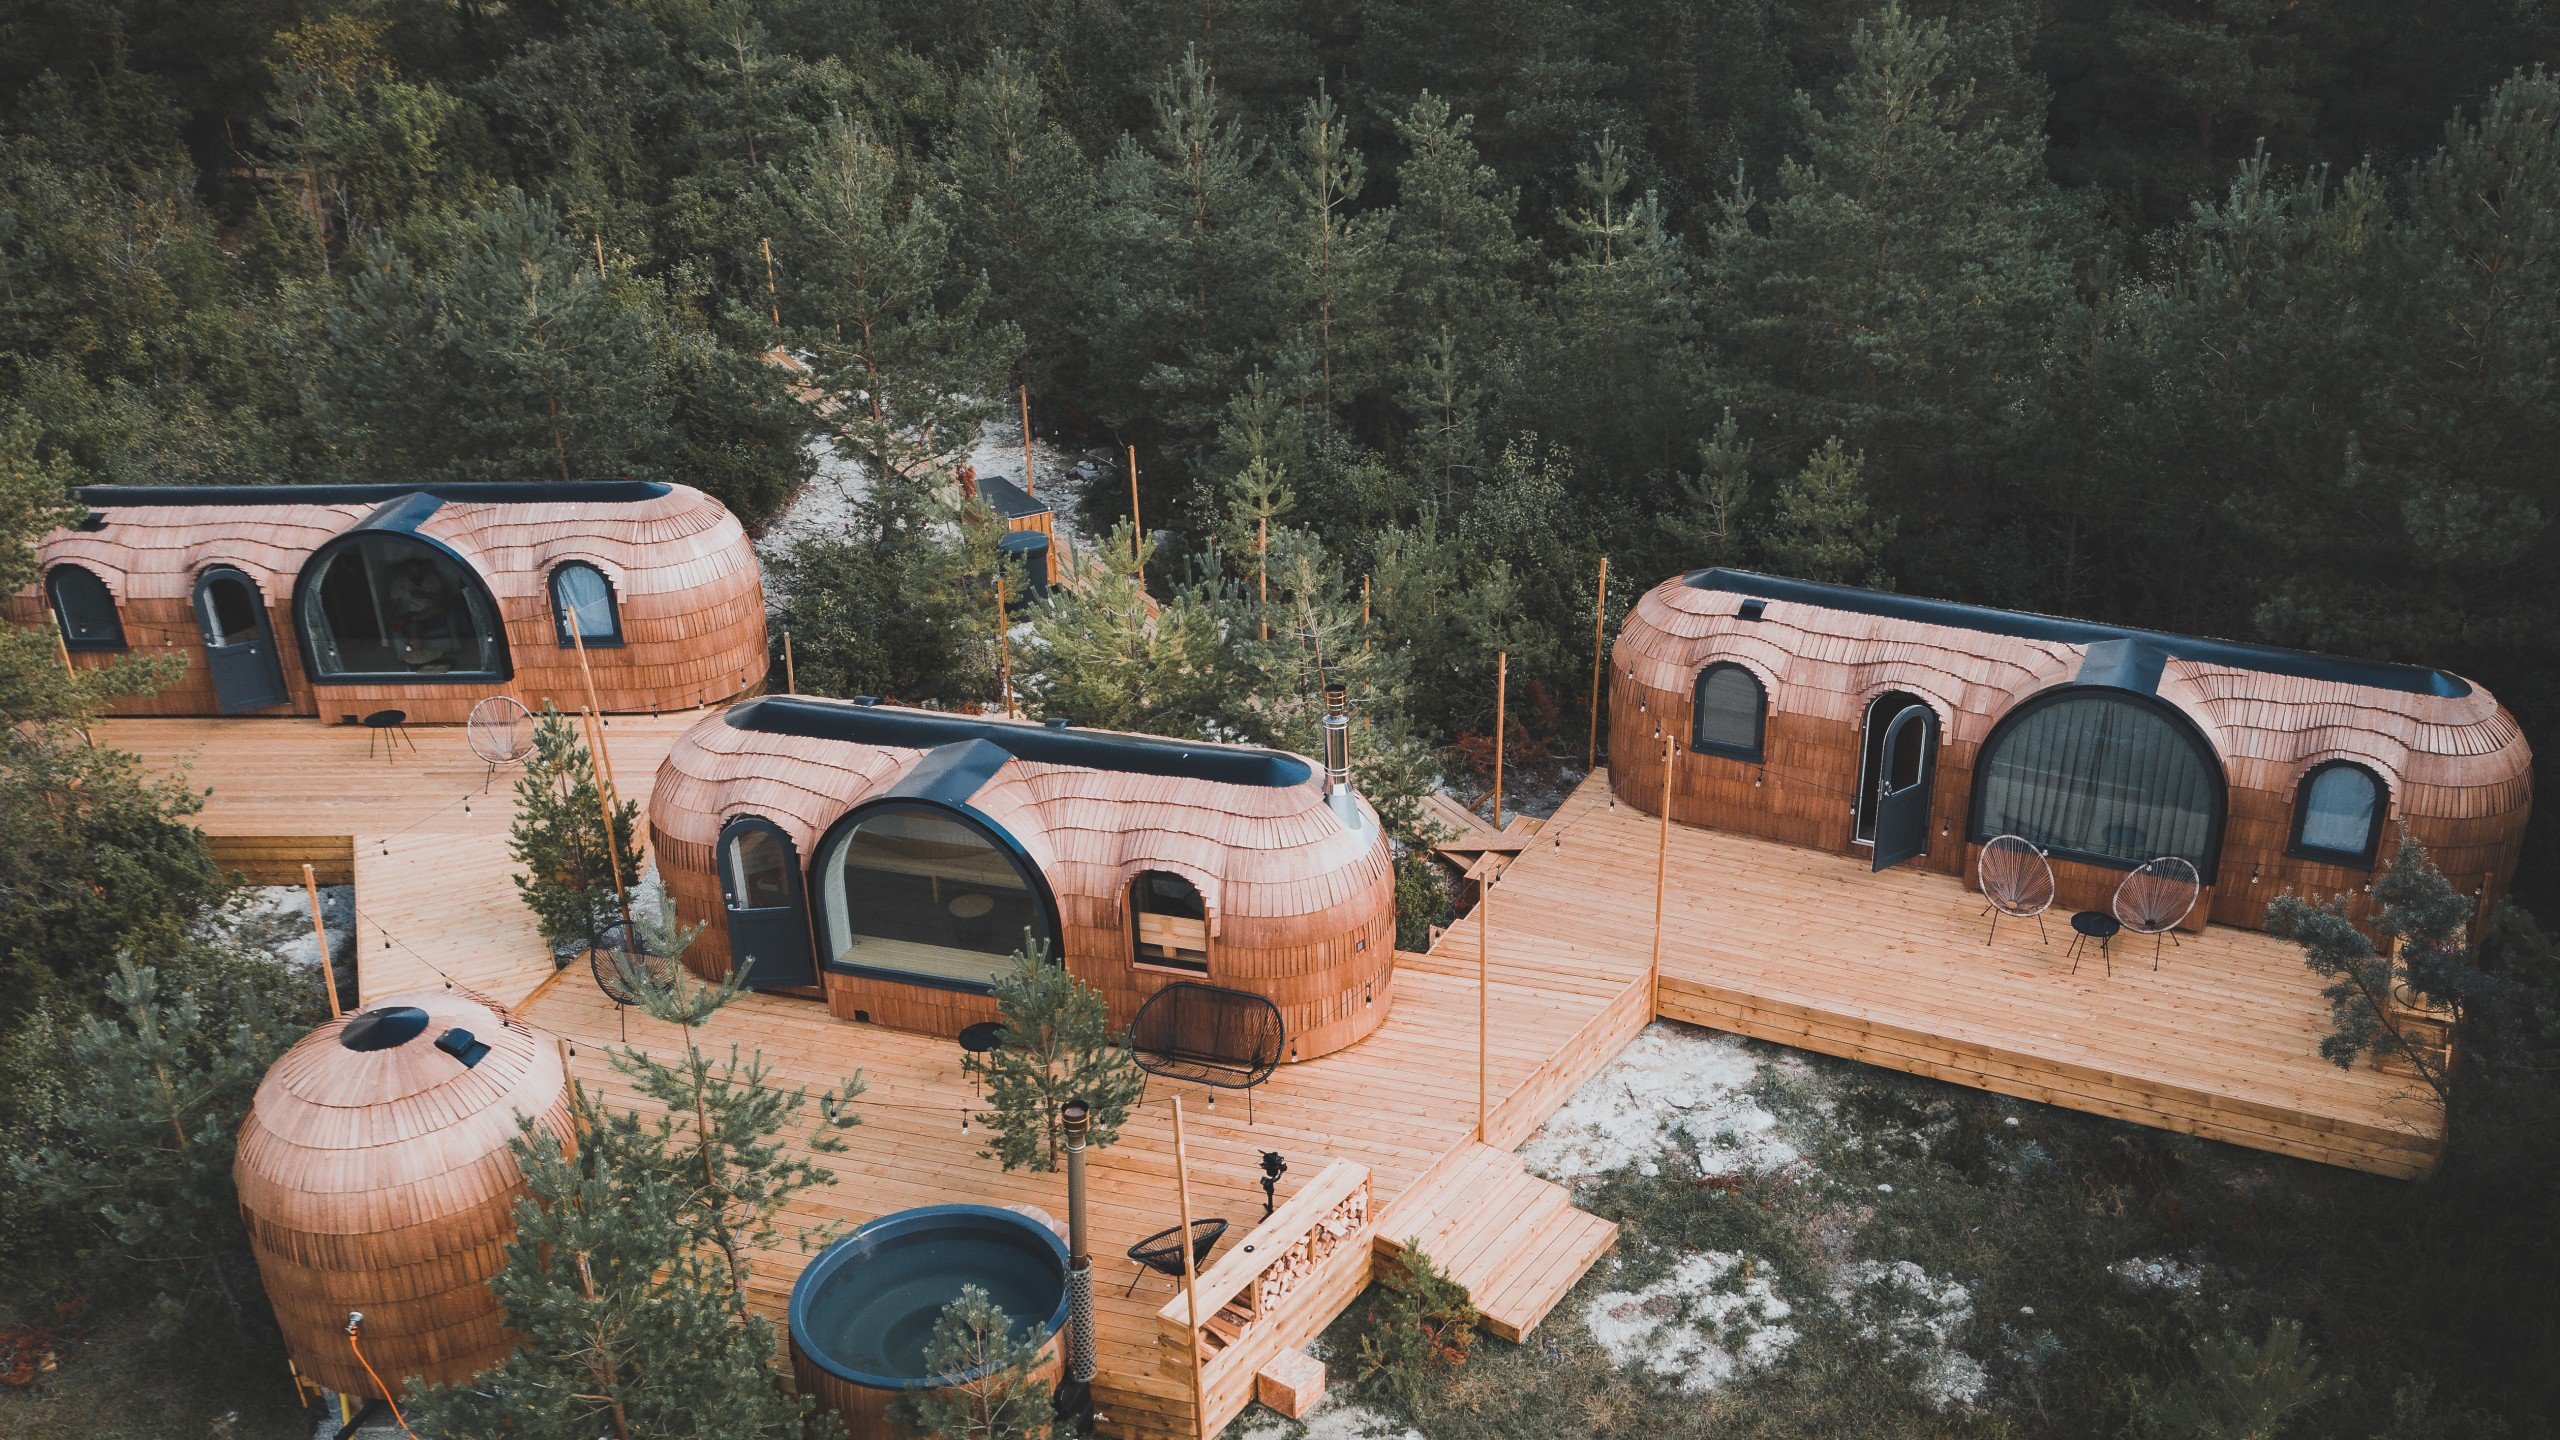 Setup of 3 cabins with a sauna and a hottub